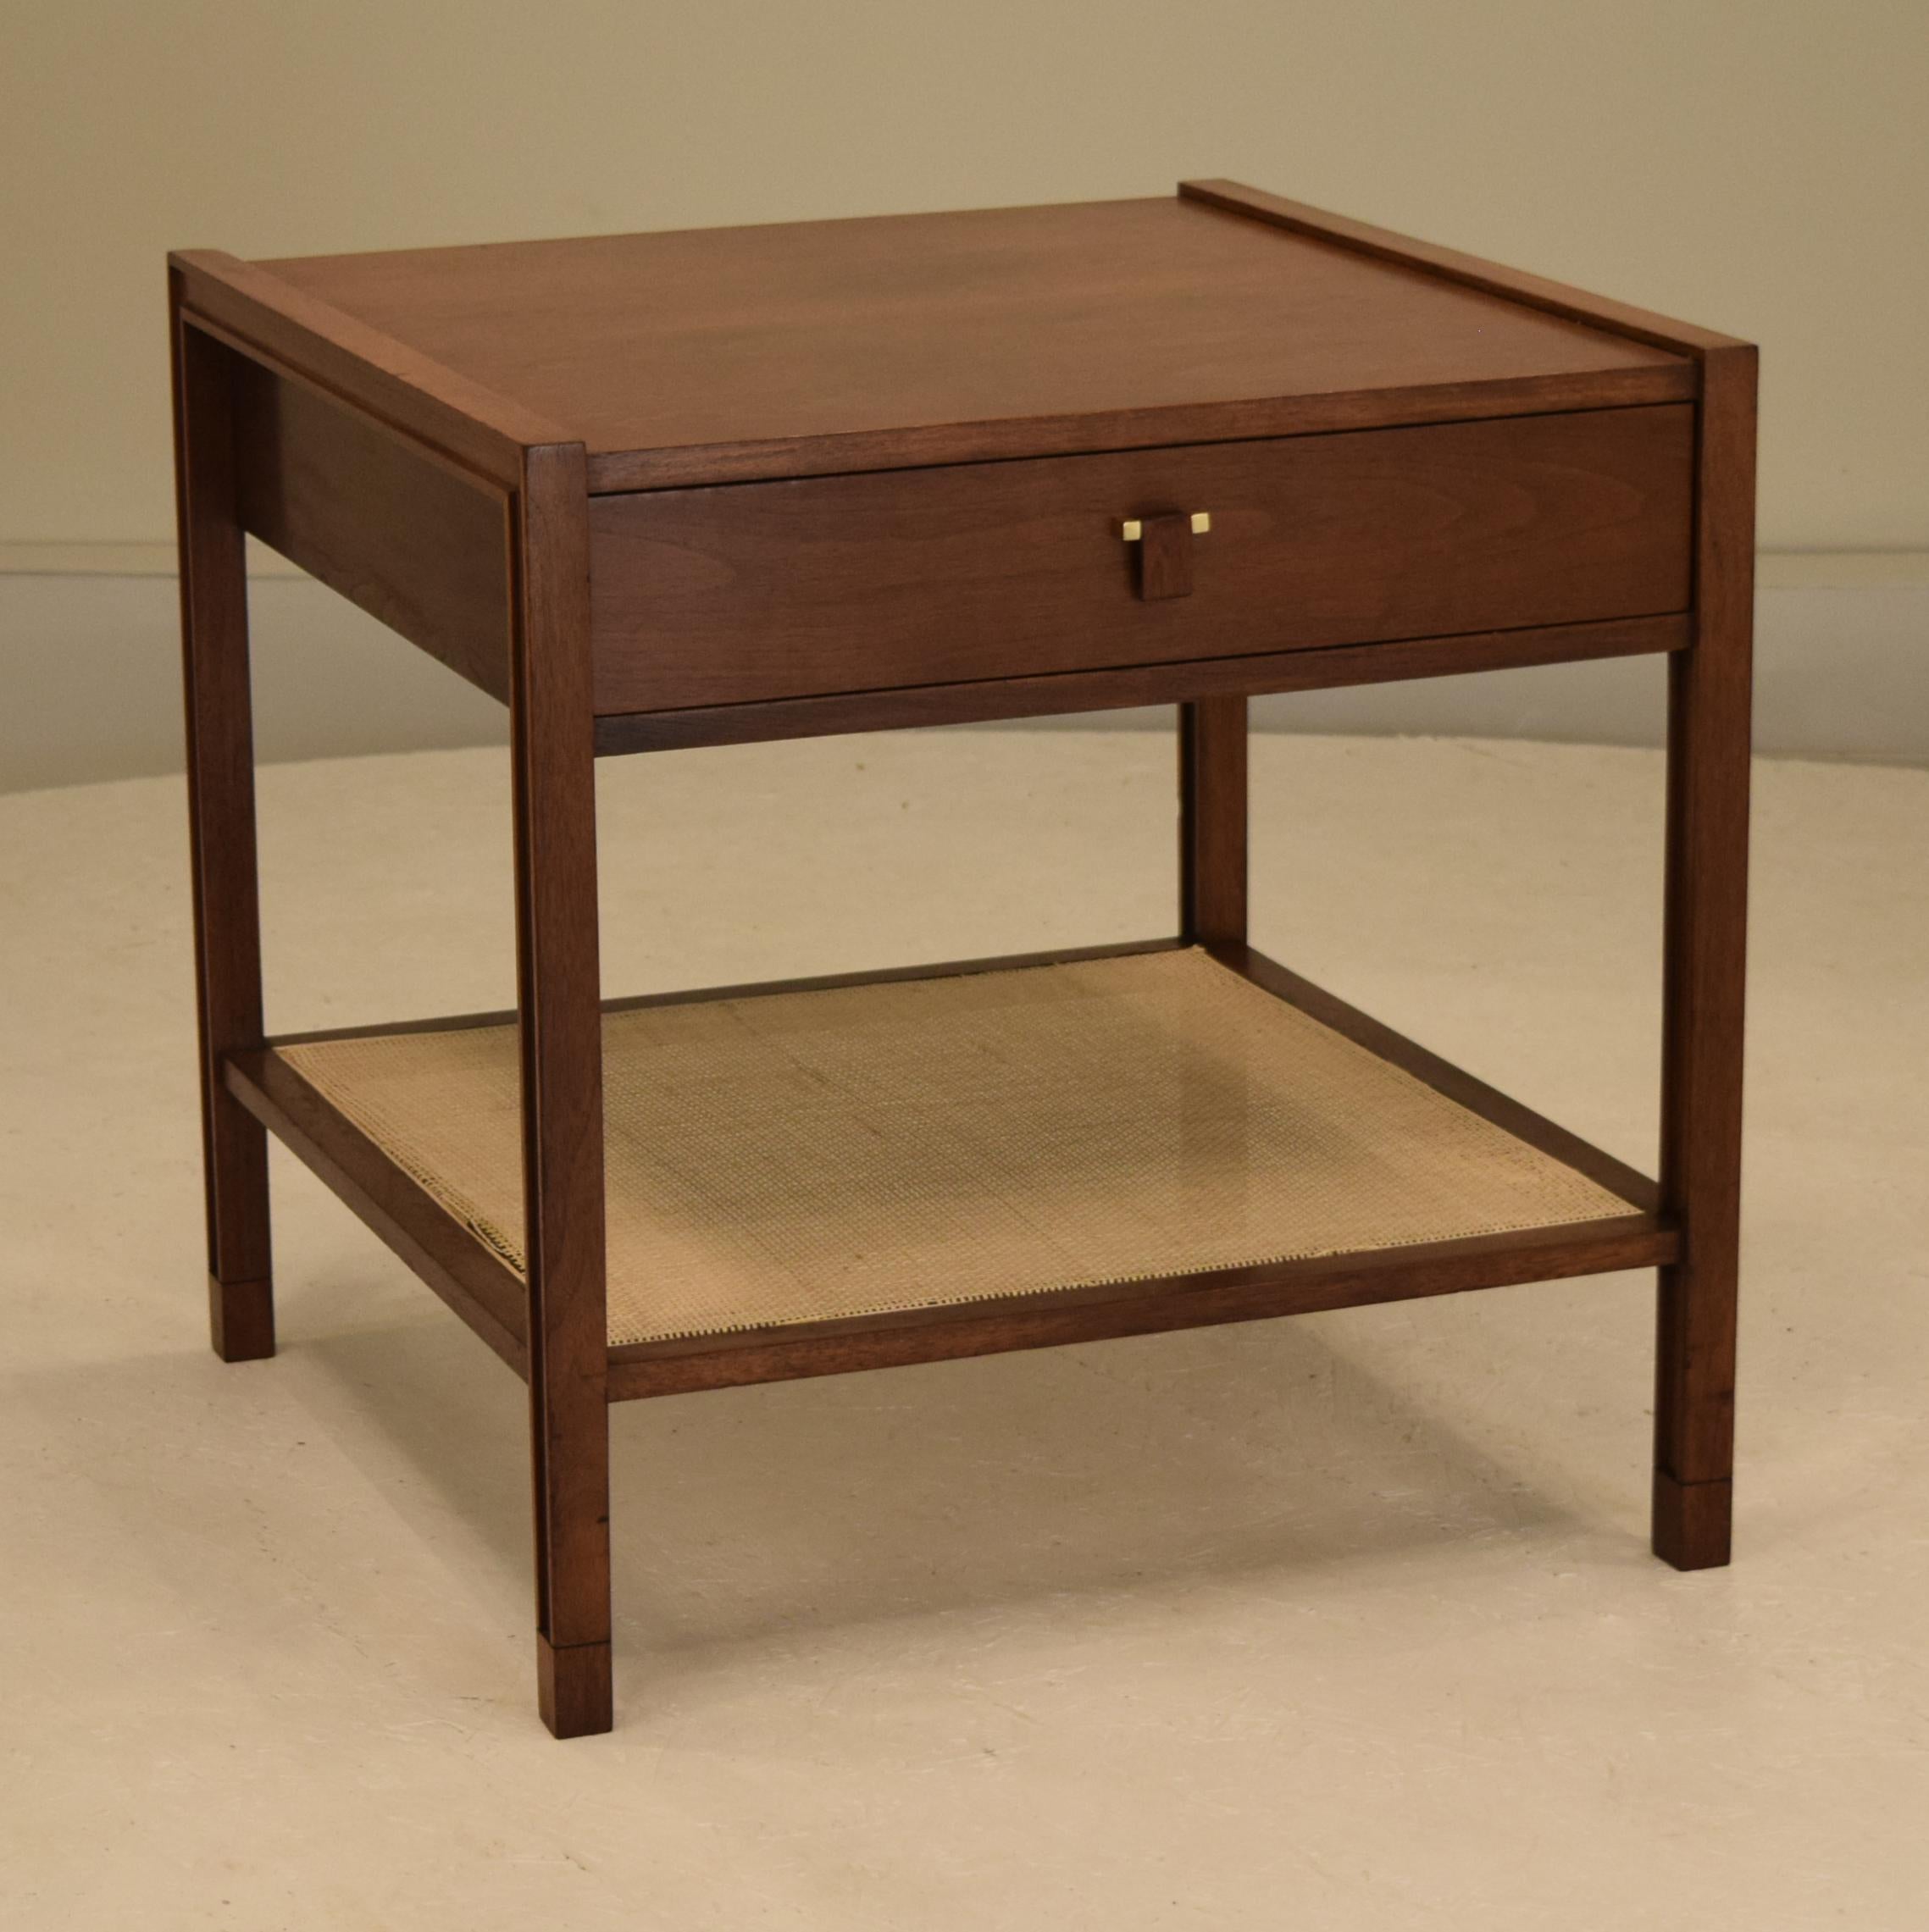 Produced by Dunbar circa 1965. Large occasional square cube end table measuring 27.5